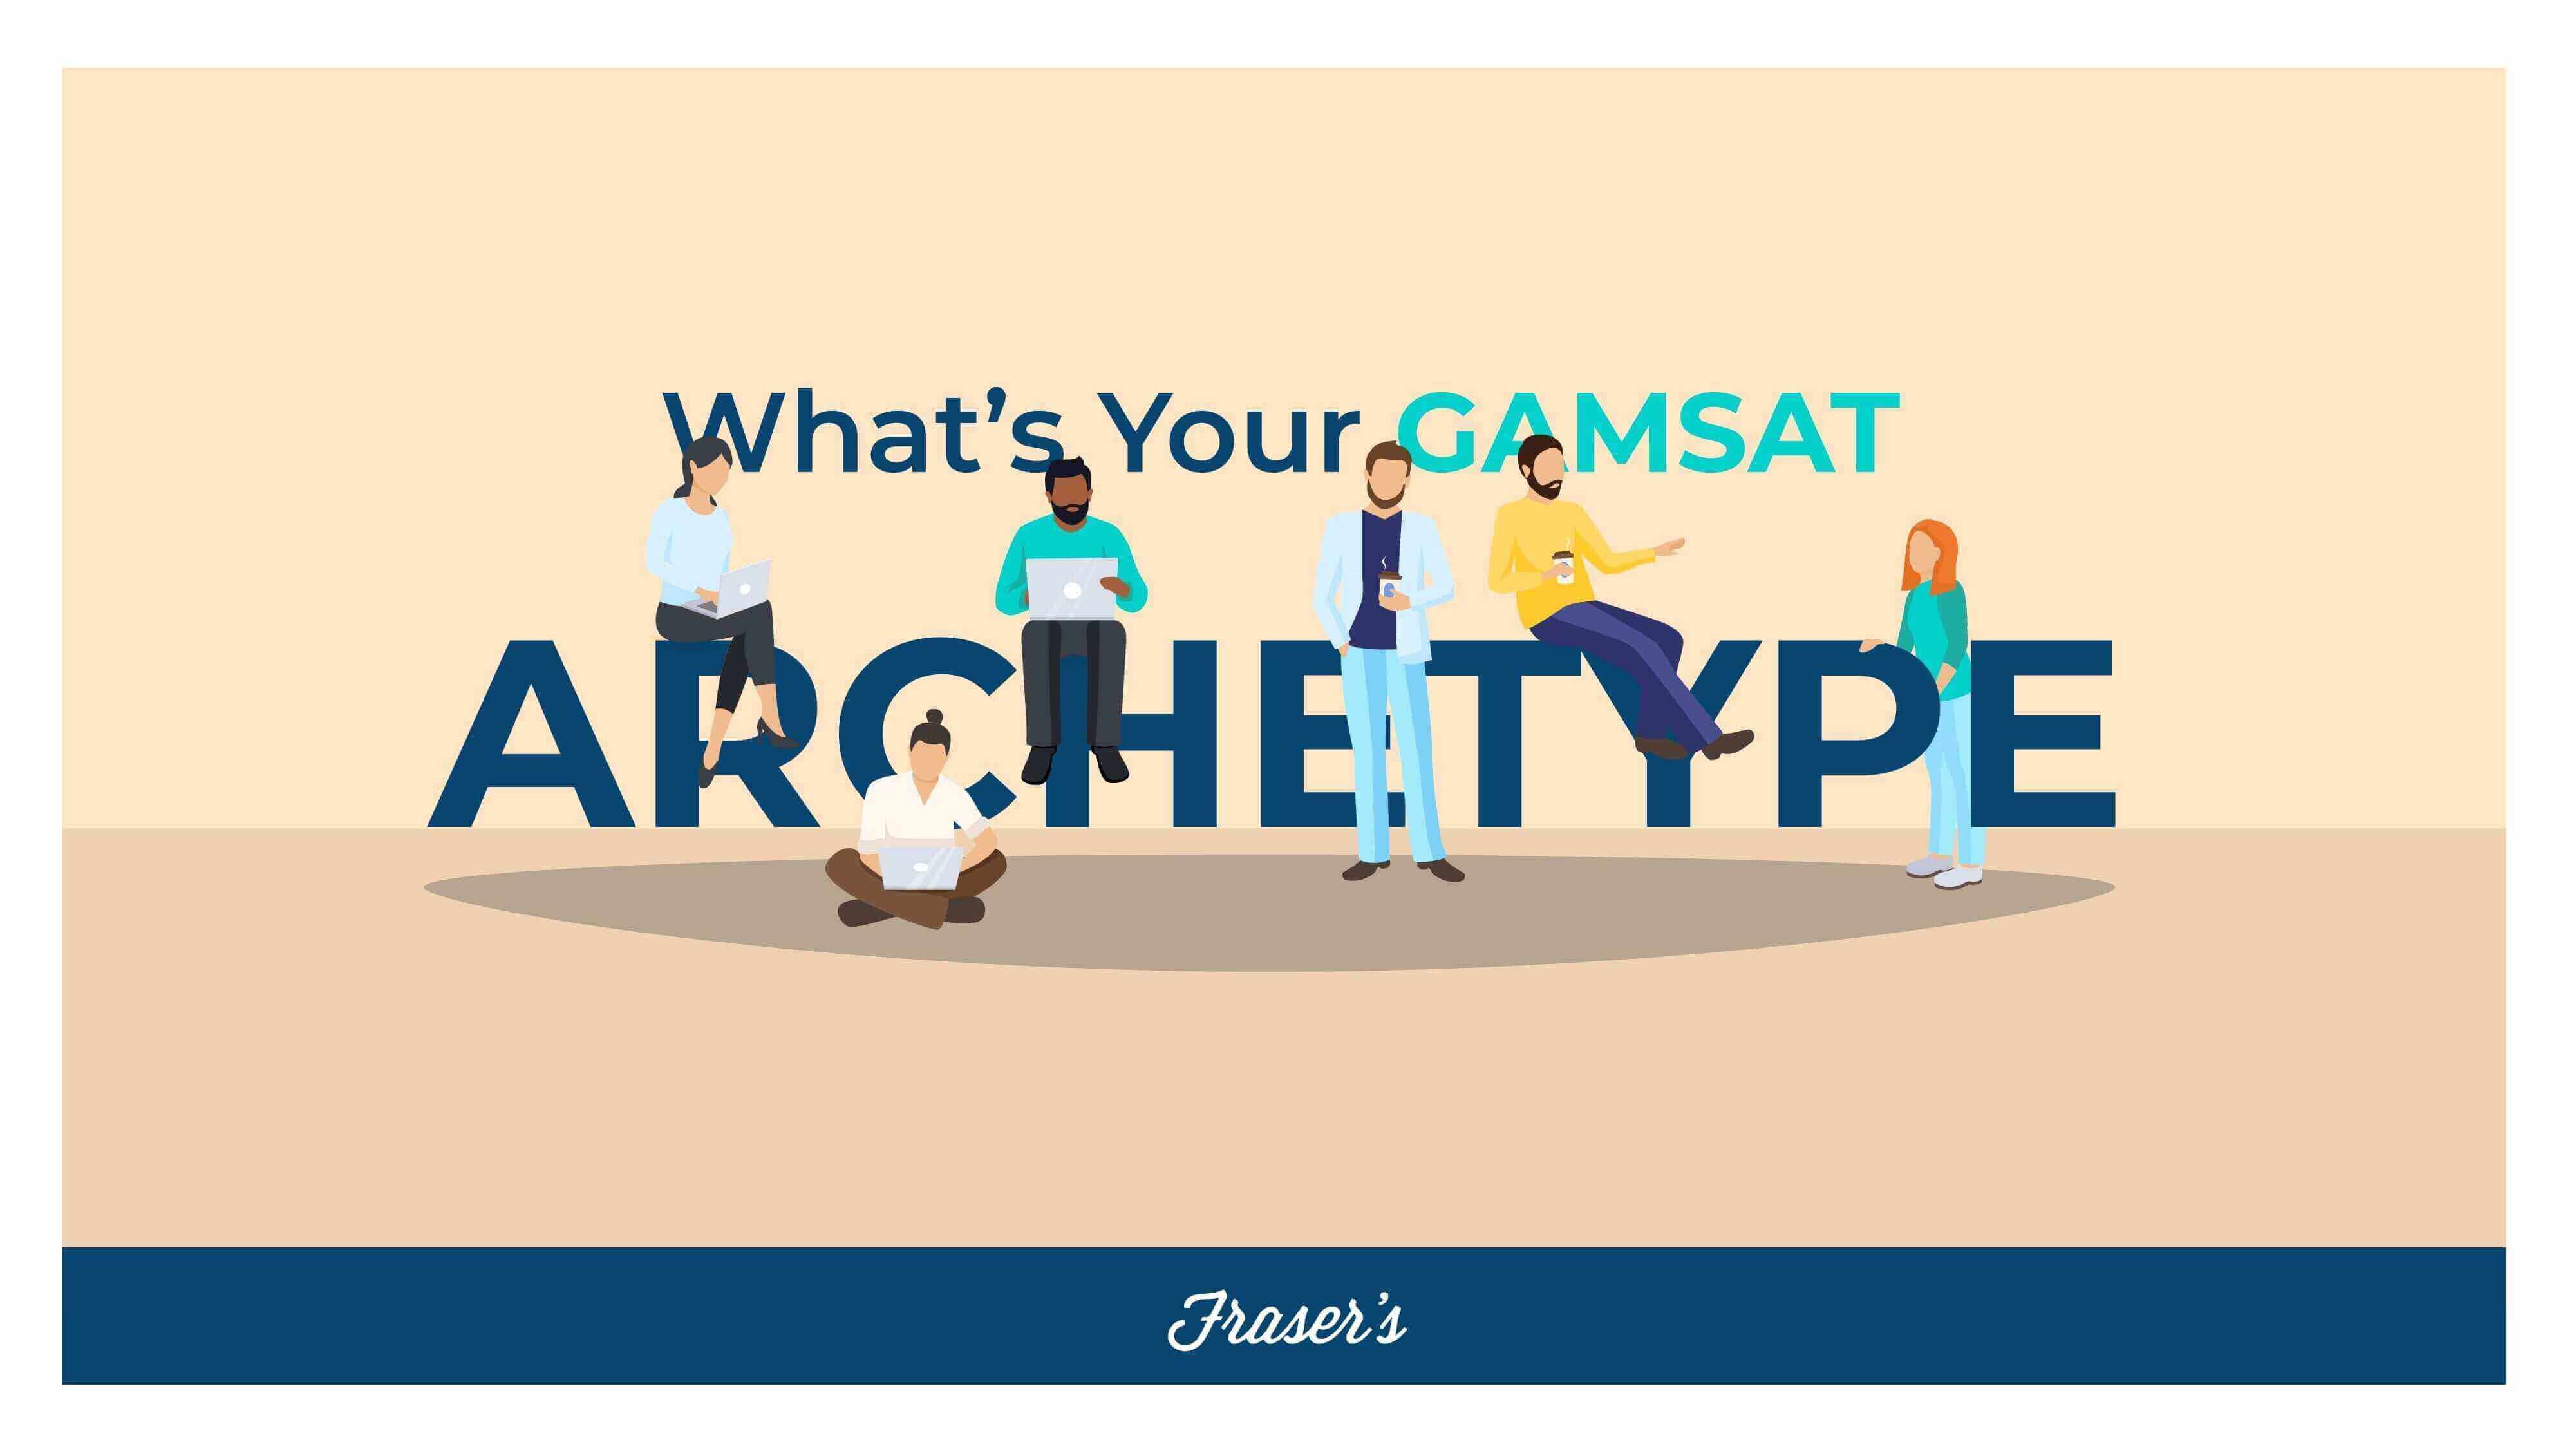 What's your GAMSAT Archetype? featured image